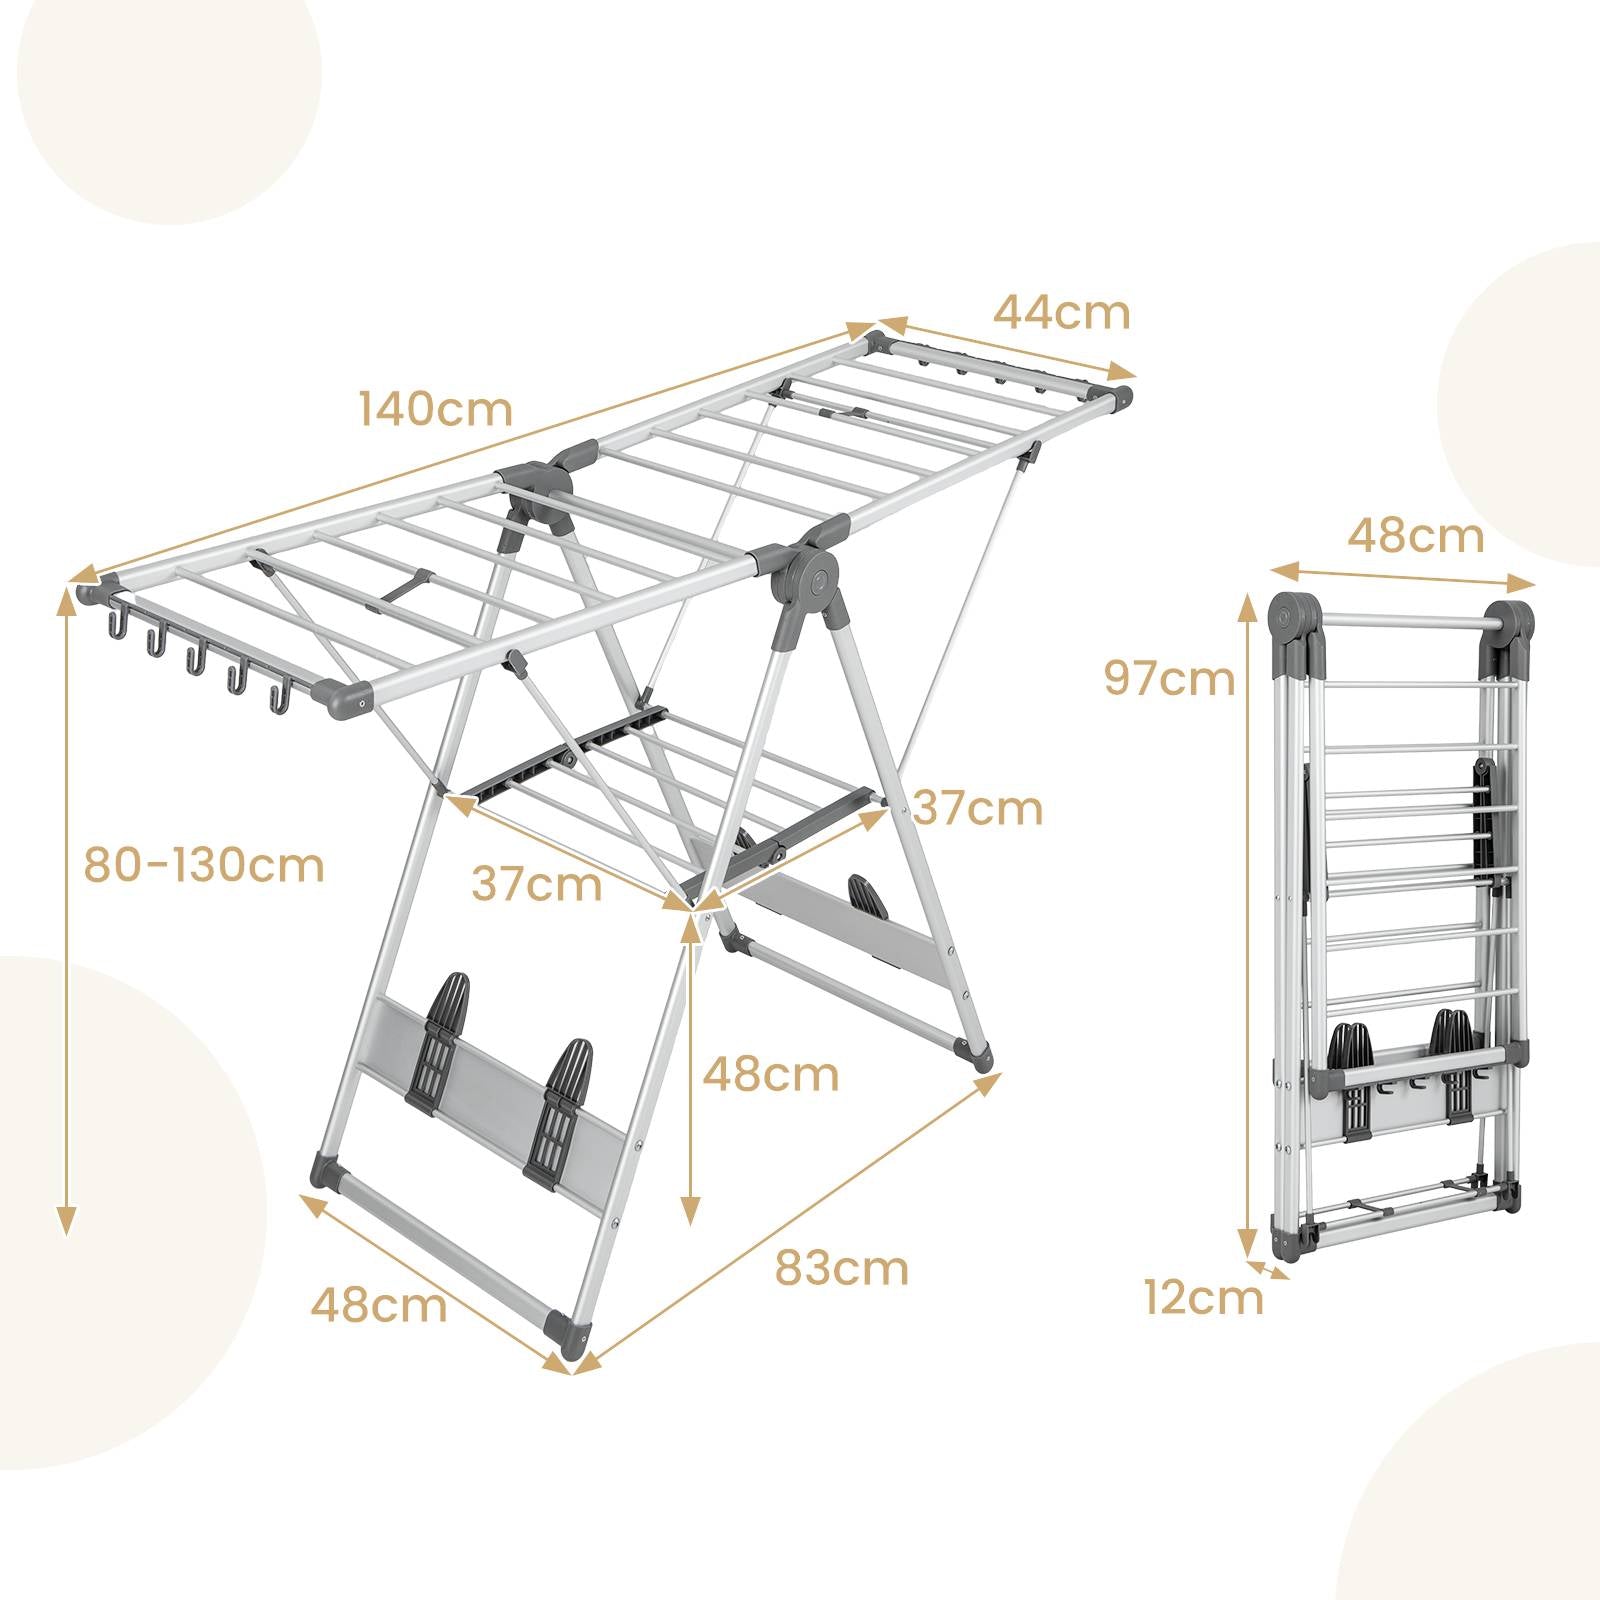 2-Tier Clothes Drying Rack, 2-Layer Aluminum Folding Clothes Drying Rack, Silver, Costway, 2